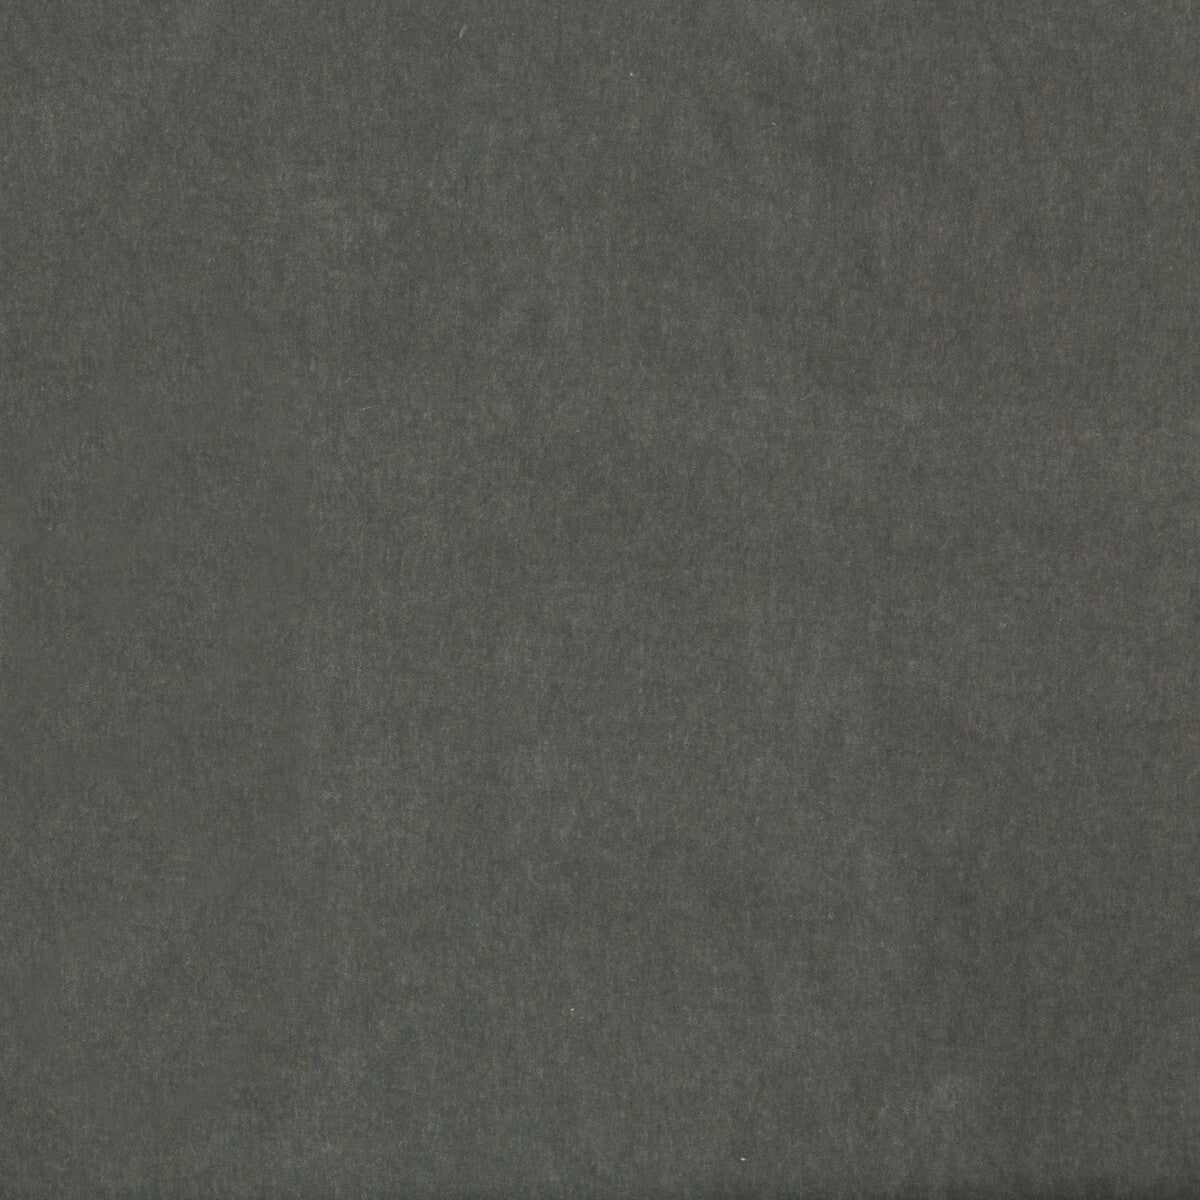 Countess Mohair fabric in steel color - pattern 34290.52.0 - by Kravet Couture